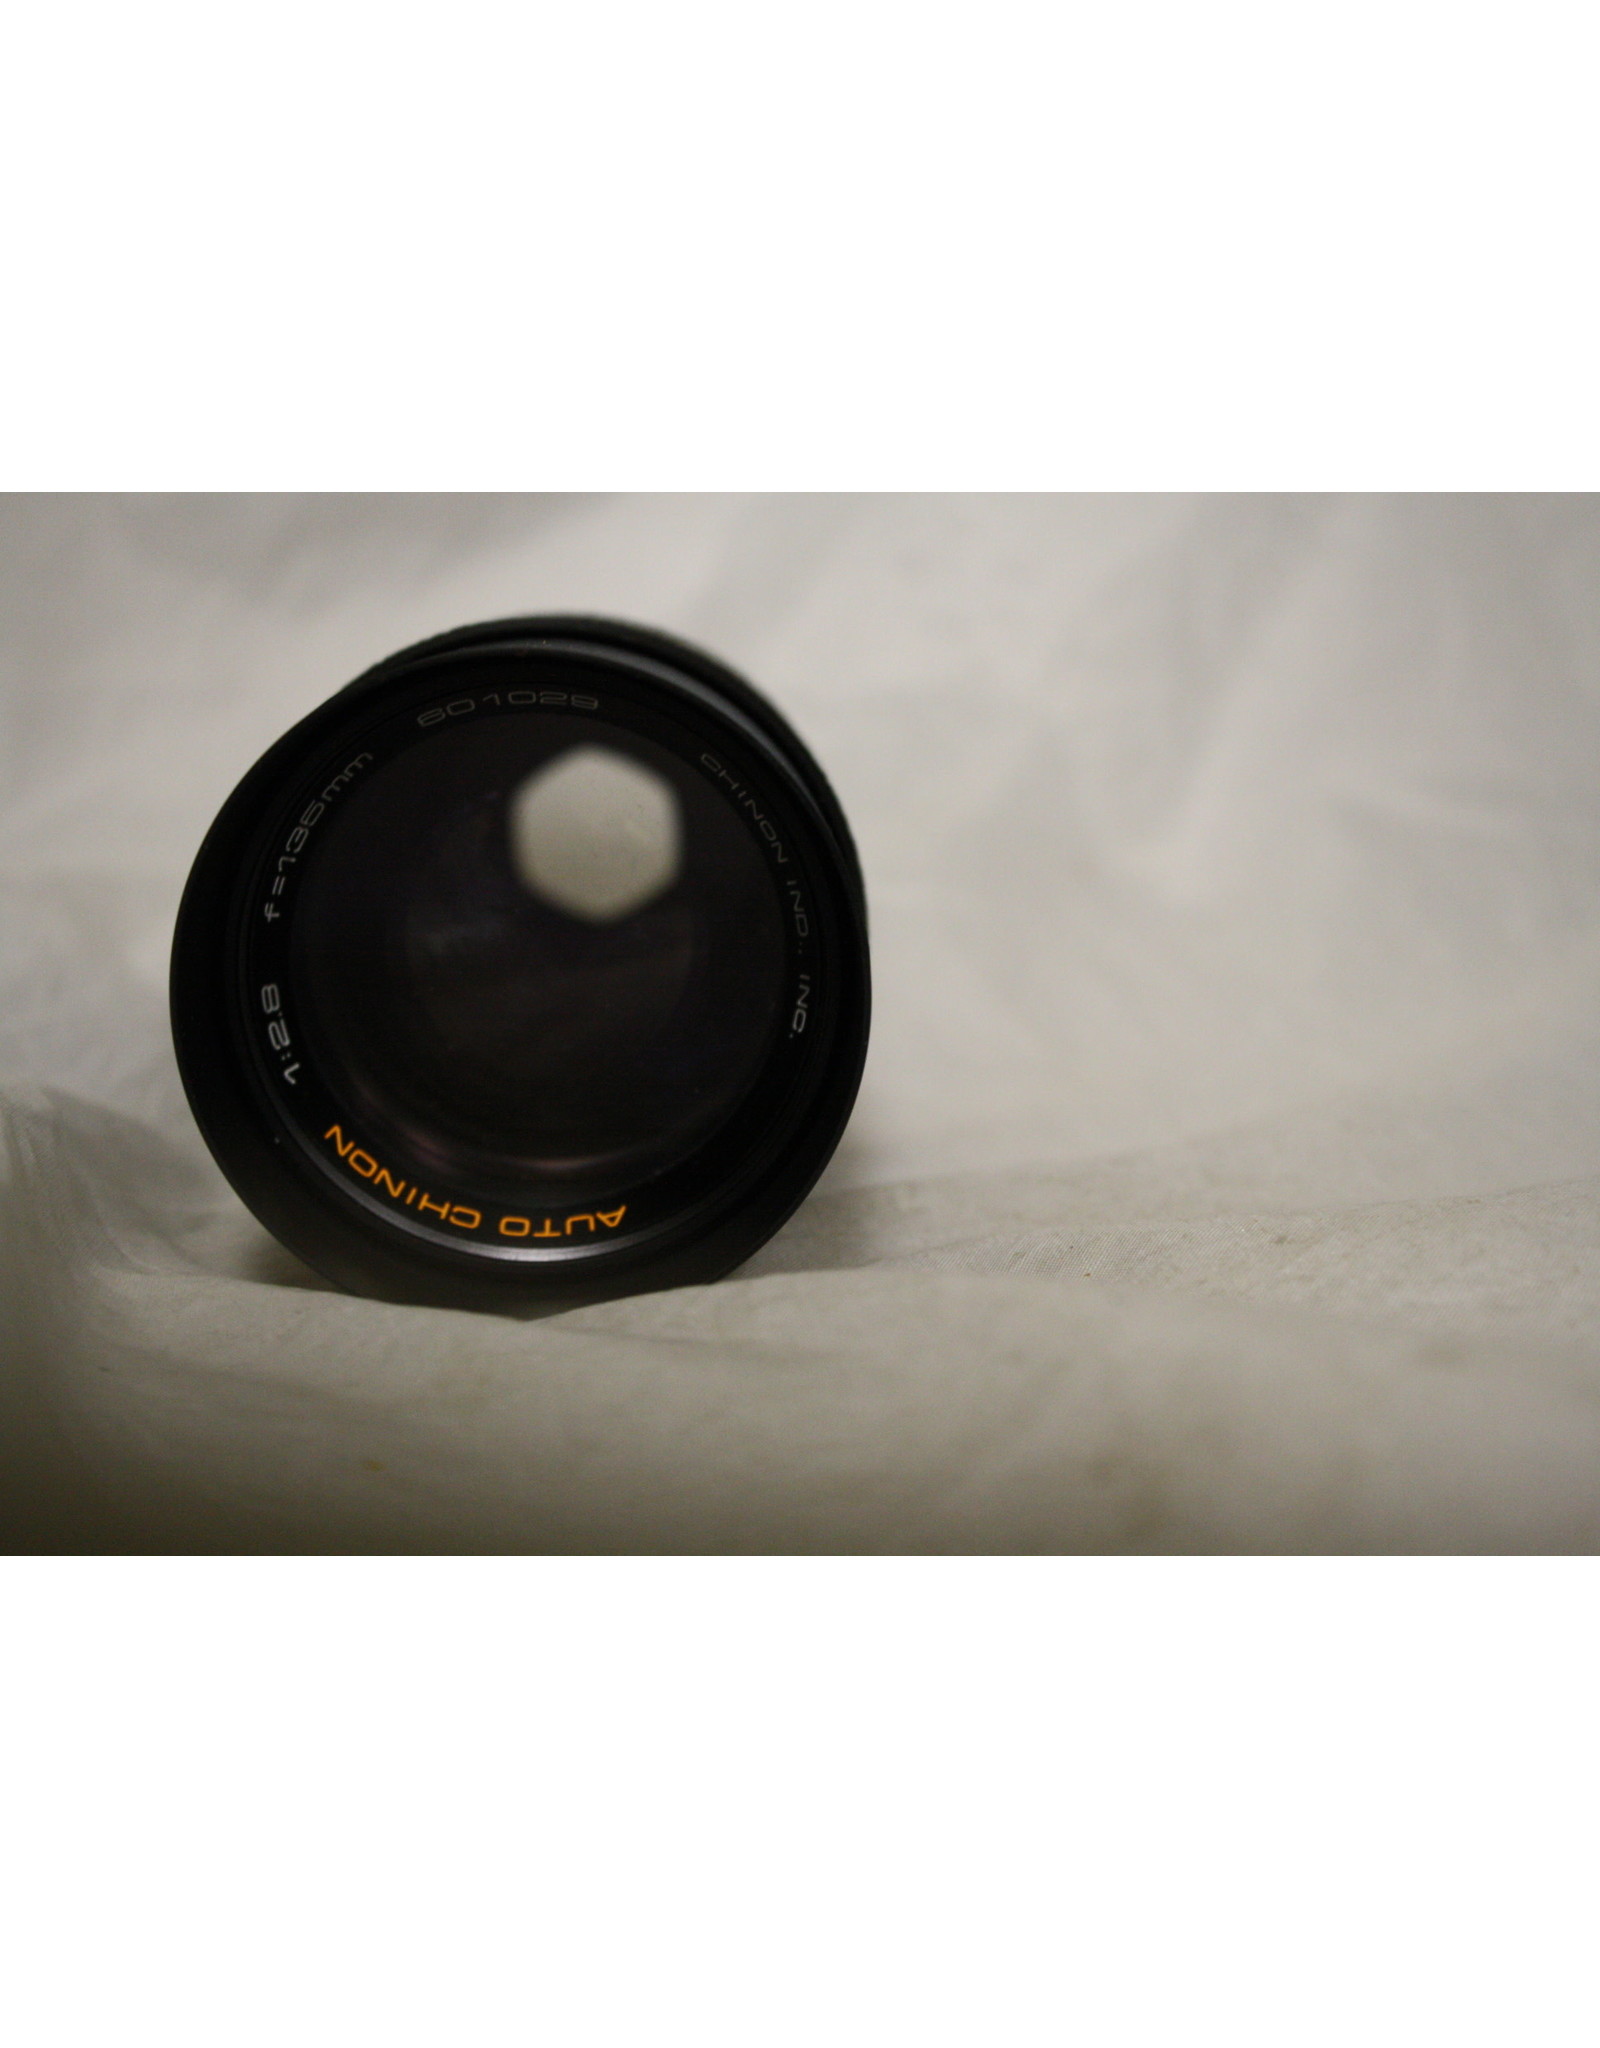 Chinon Chinon 135mm 2.8 Lens for Universal Screw Mount (Pre-owned)